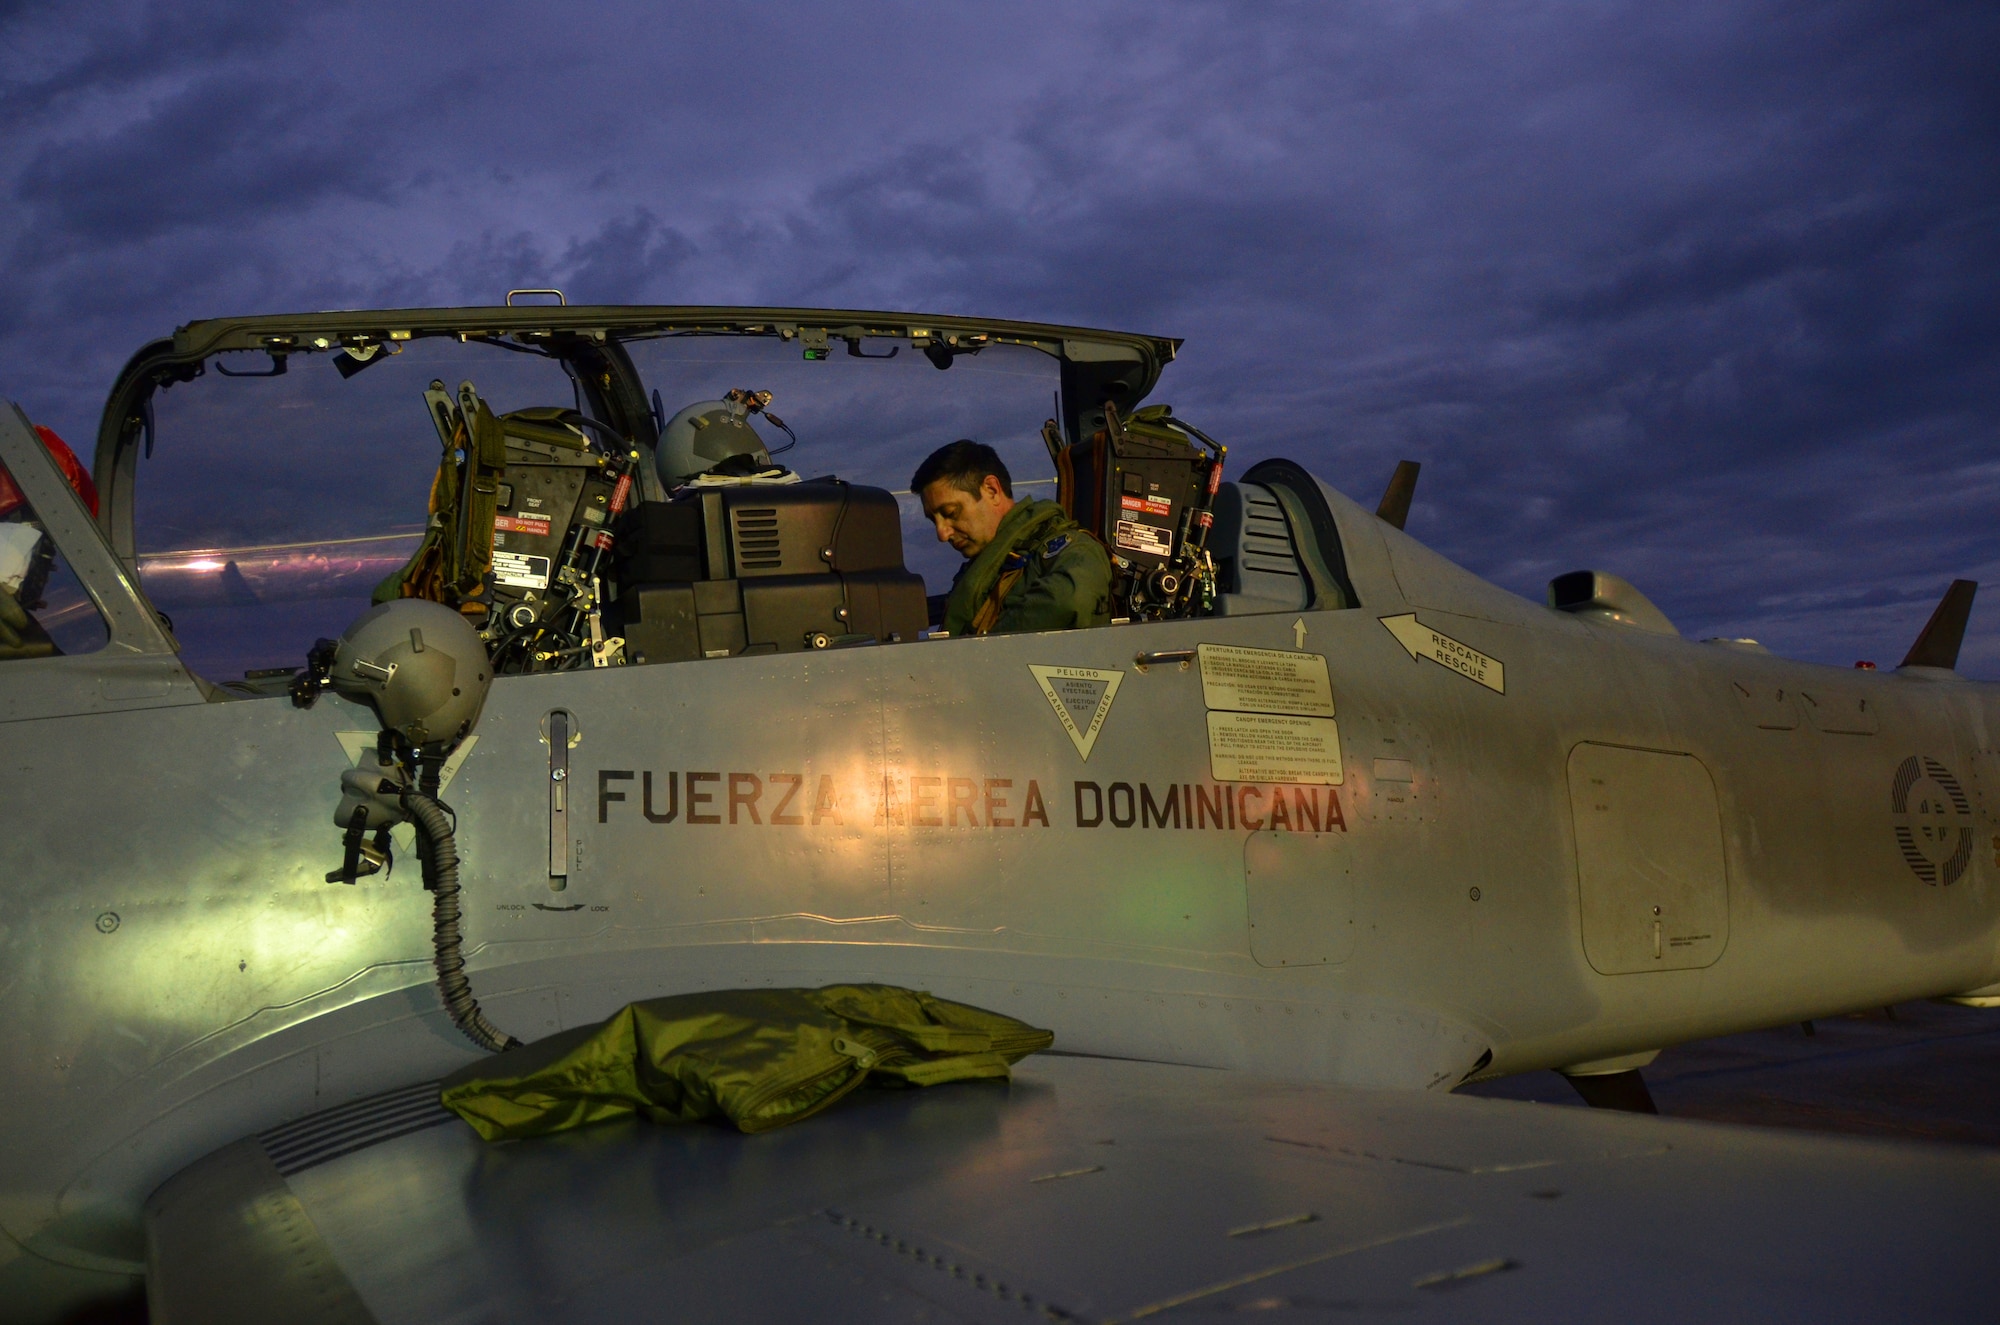 Col. Mike Torrealday, a U.S. Air Force F-16 instructor pilot, prepares for a nighttime flight in the back seat of a Dominican Republic air force A-29 Super Tucano as part of an exercise to combat illegal drug trafficking Dec. 4, 2013. The exercise is part of the Sovereign Skies Program, an initiative between the U.S., Colombian, and Dominican Republic air forces to share best-practices on procedures to detect, track and intercept illegal drugs moving north from South America. Since the program’s inception, the number of aircraft suspected to traffic drugs through the Dominican Republic dropped from more than 100 annually to nearly zero. (U.S. Air Force photo by Capt. Justin Brockhoff/Released)


